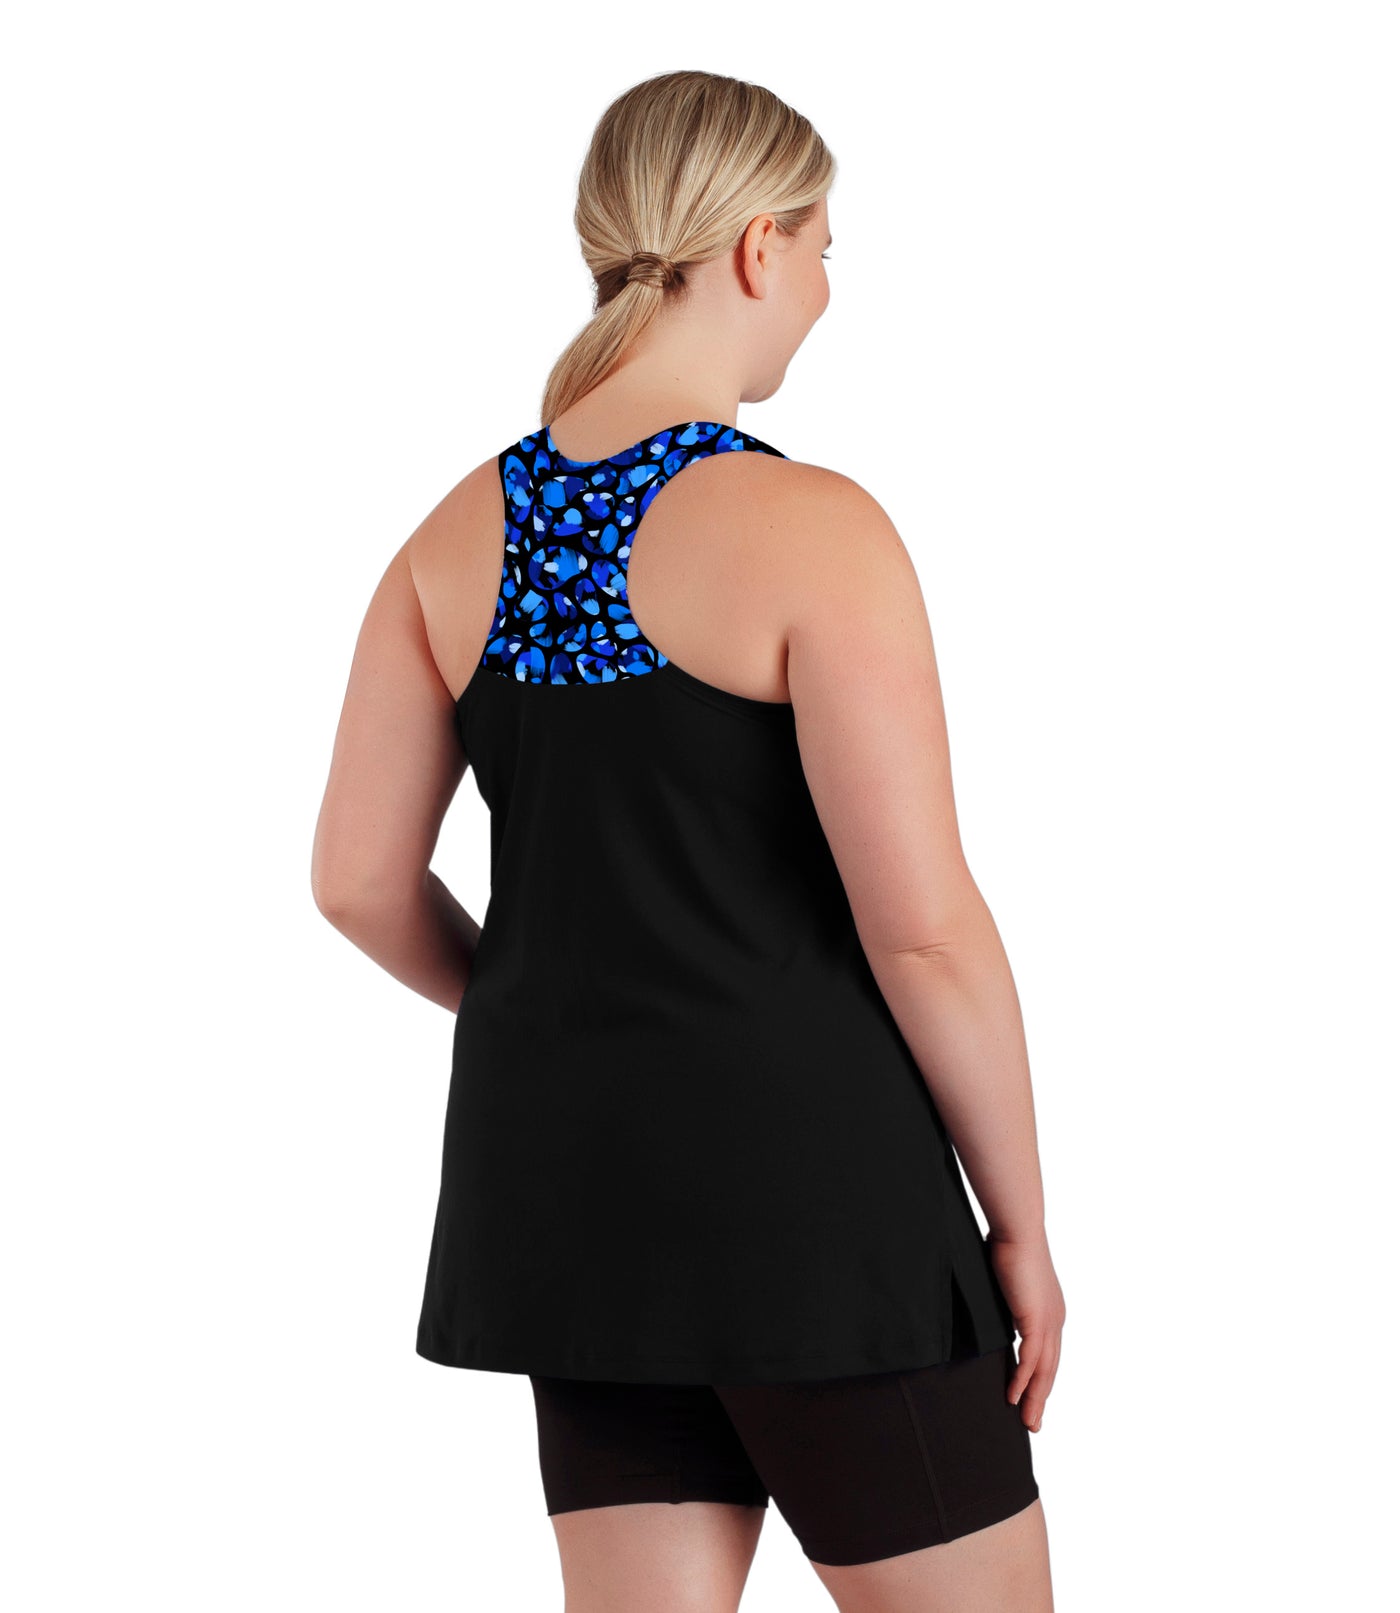 Plus size woman, facing back view, wearing AquaSport Hanalei Tankini Top Ocean Blues Print Black. The back of the tankini is razor back with the top portion covered in a blue bubble print. The bottom of the tankini is solid black falling right below the bottom. 